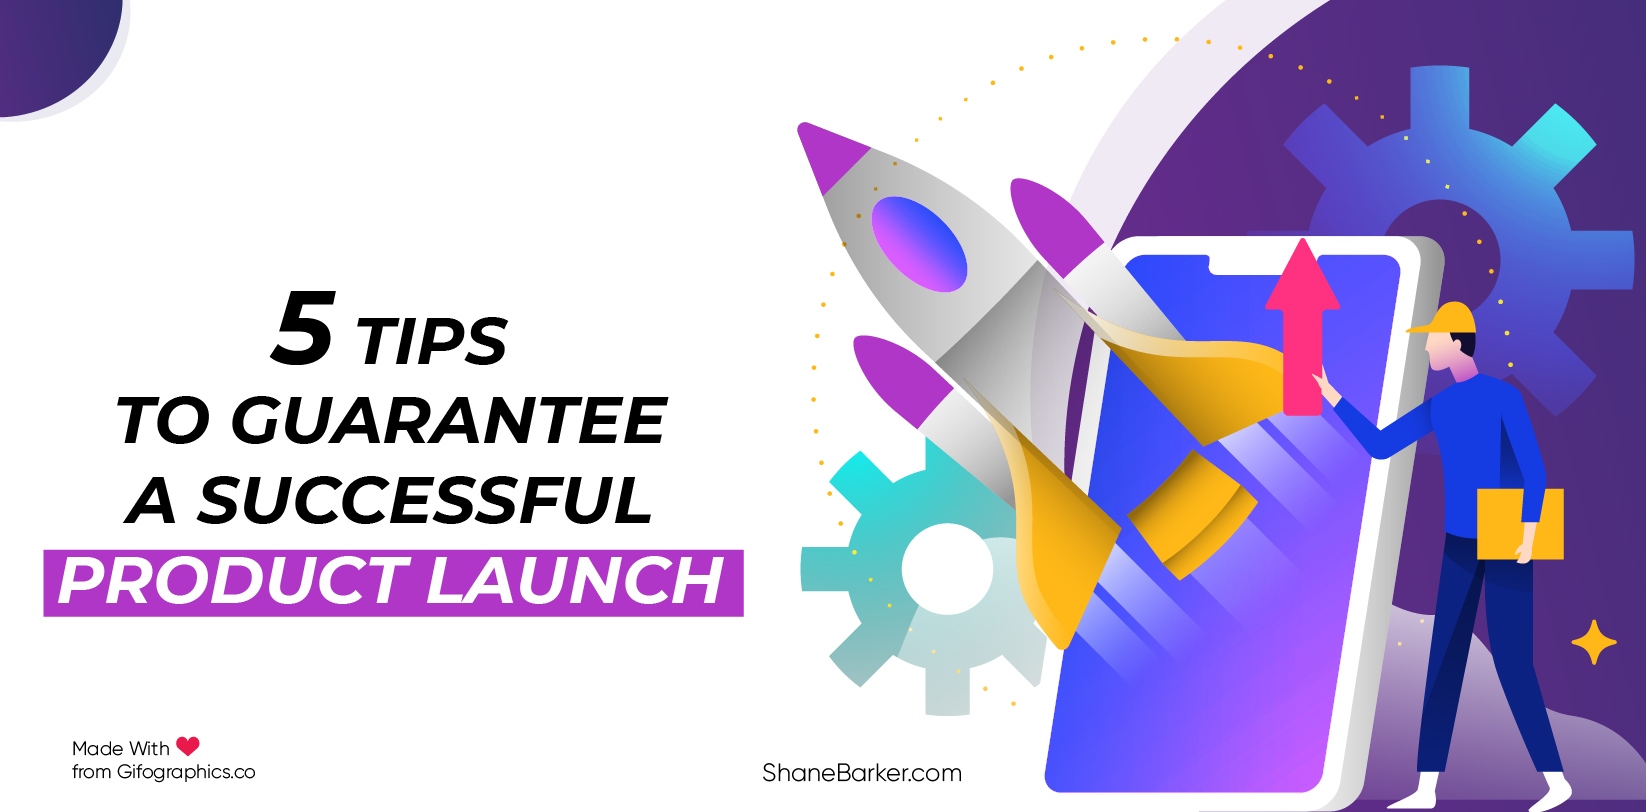 5 Tips to Guarantee a Successful Product Launch